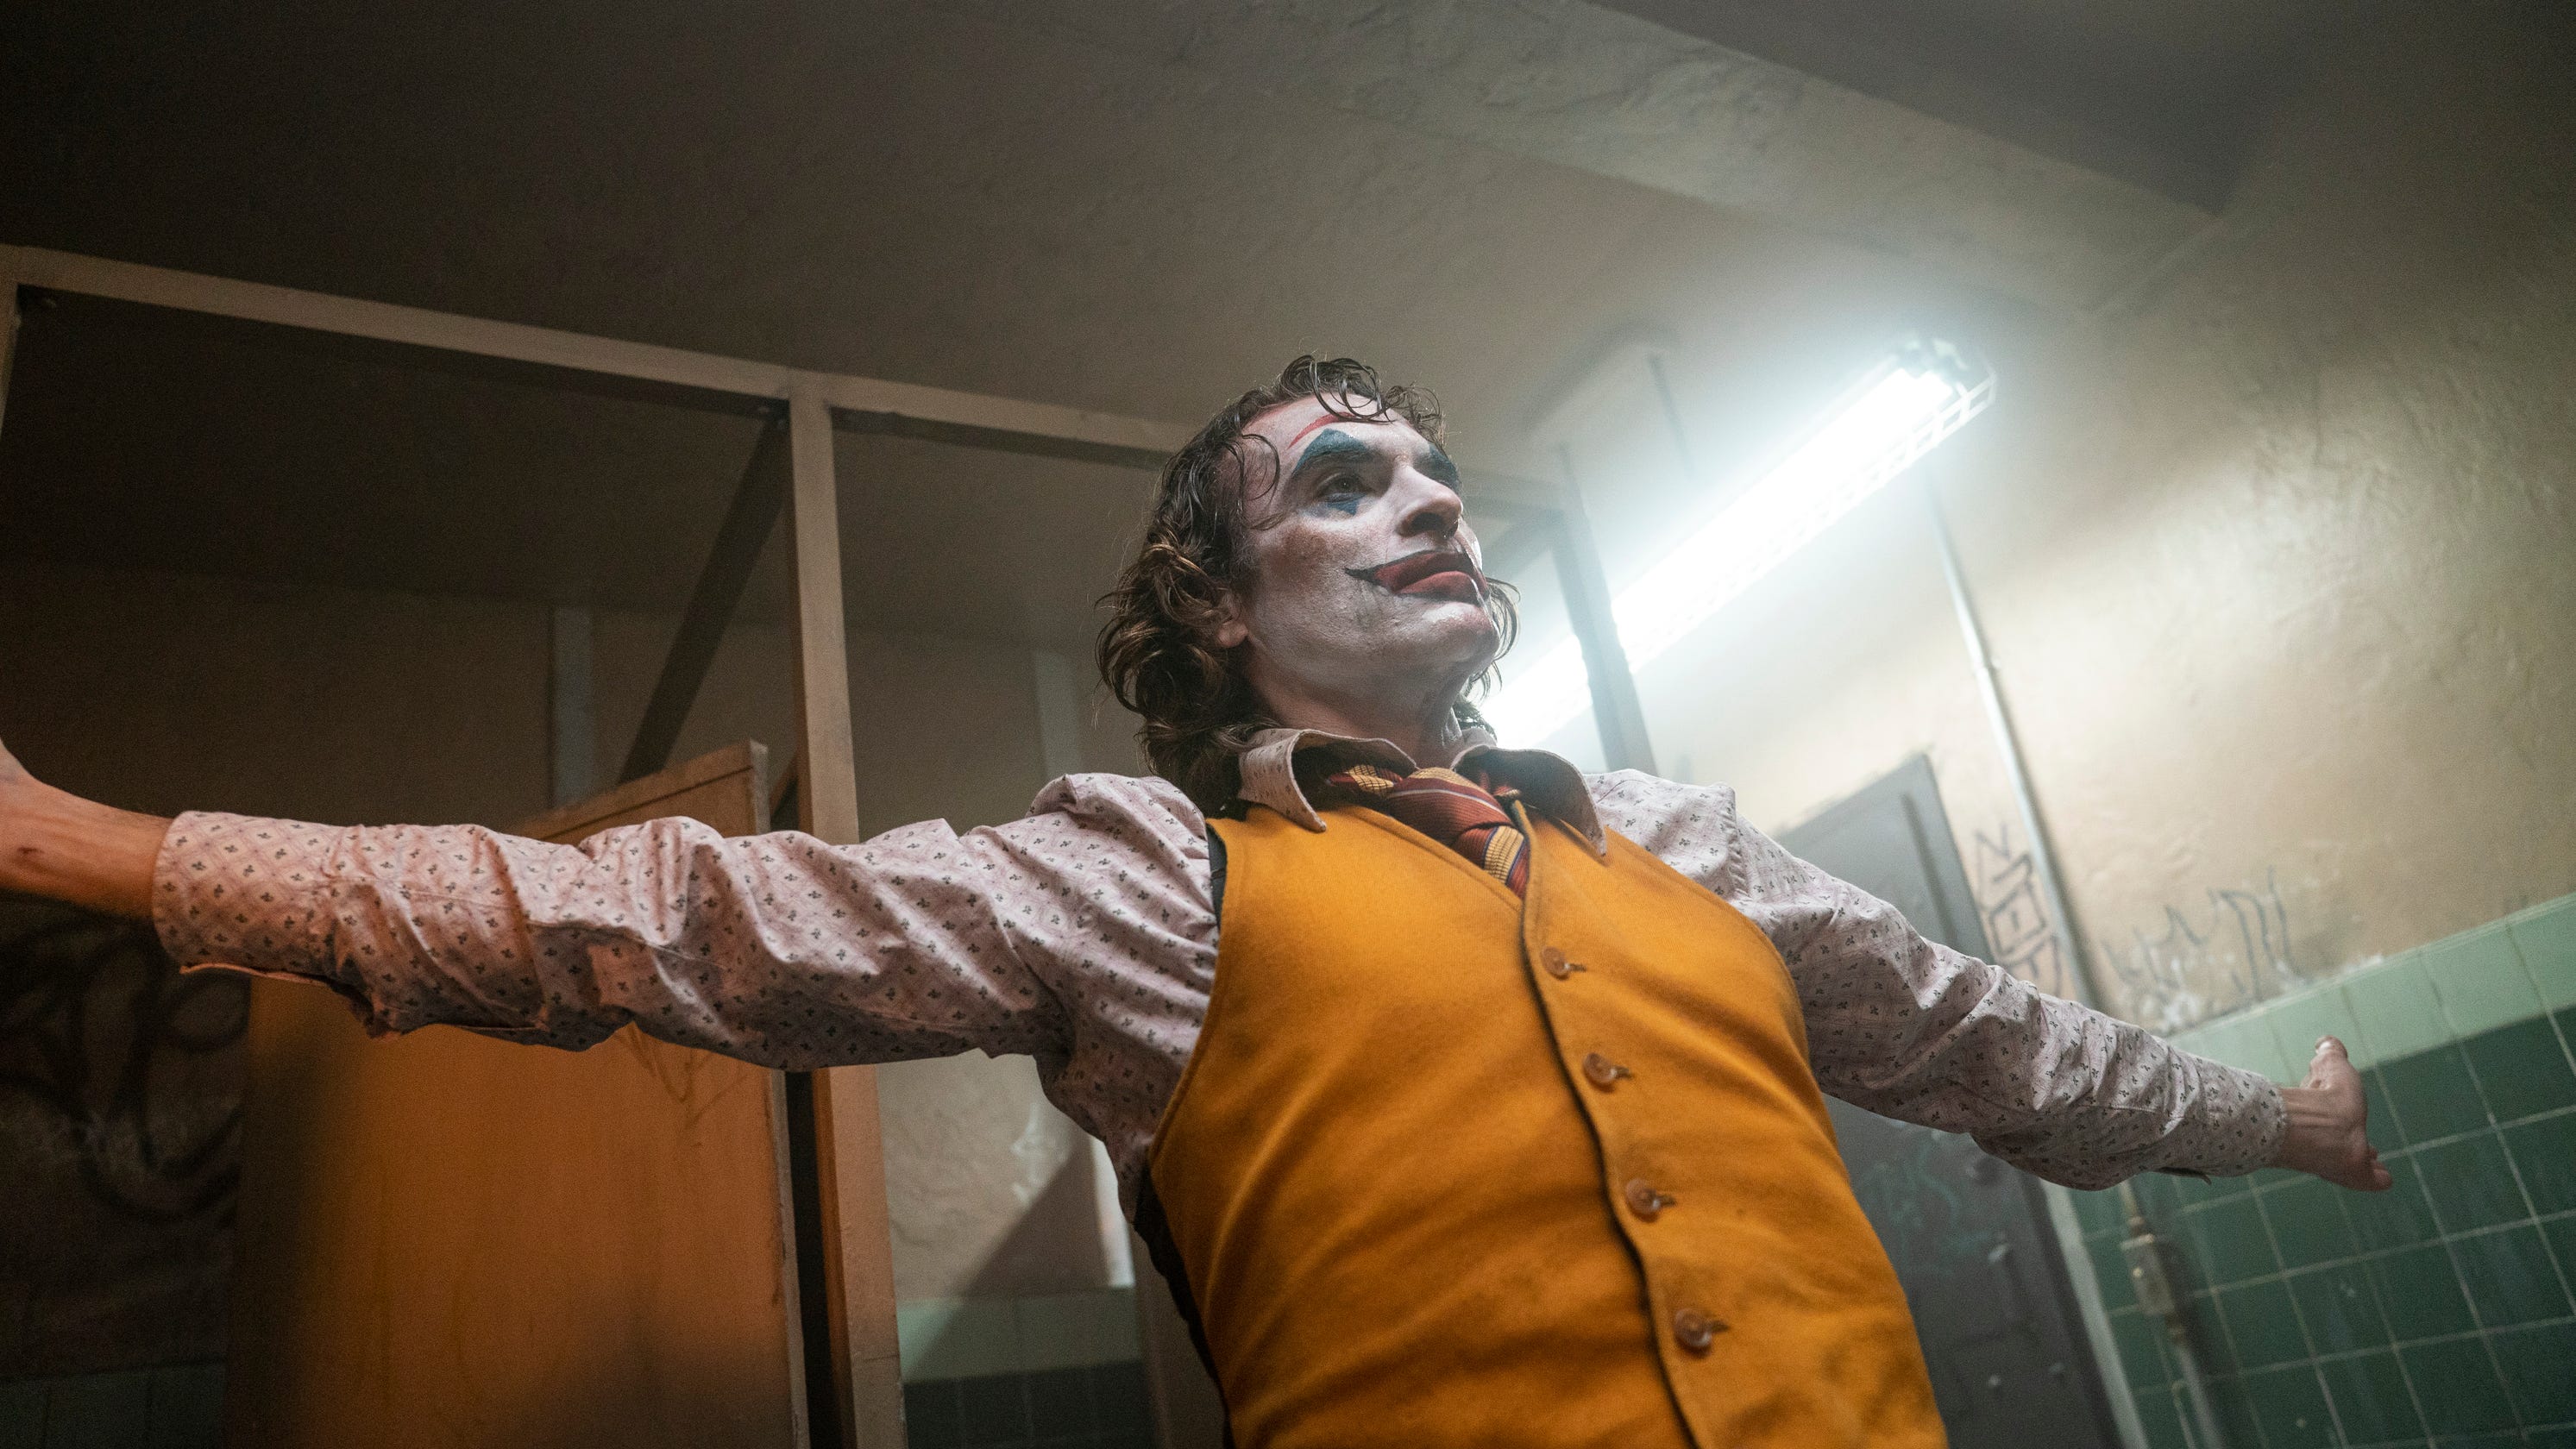 Oscar nominations 2020: 'Joker' leads with 11, including best picture2986 x 1680